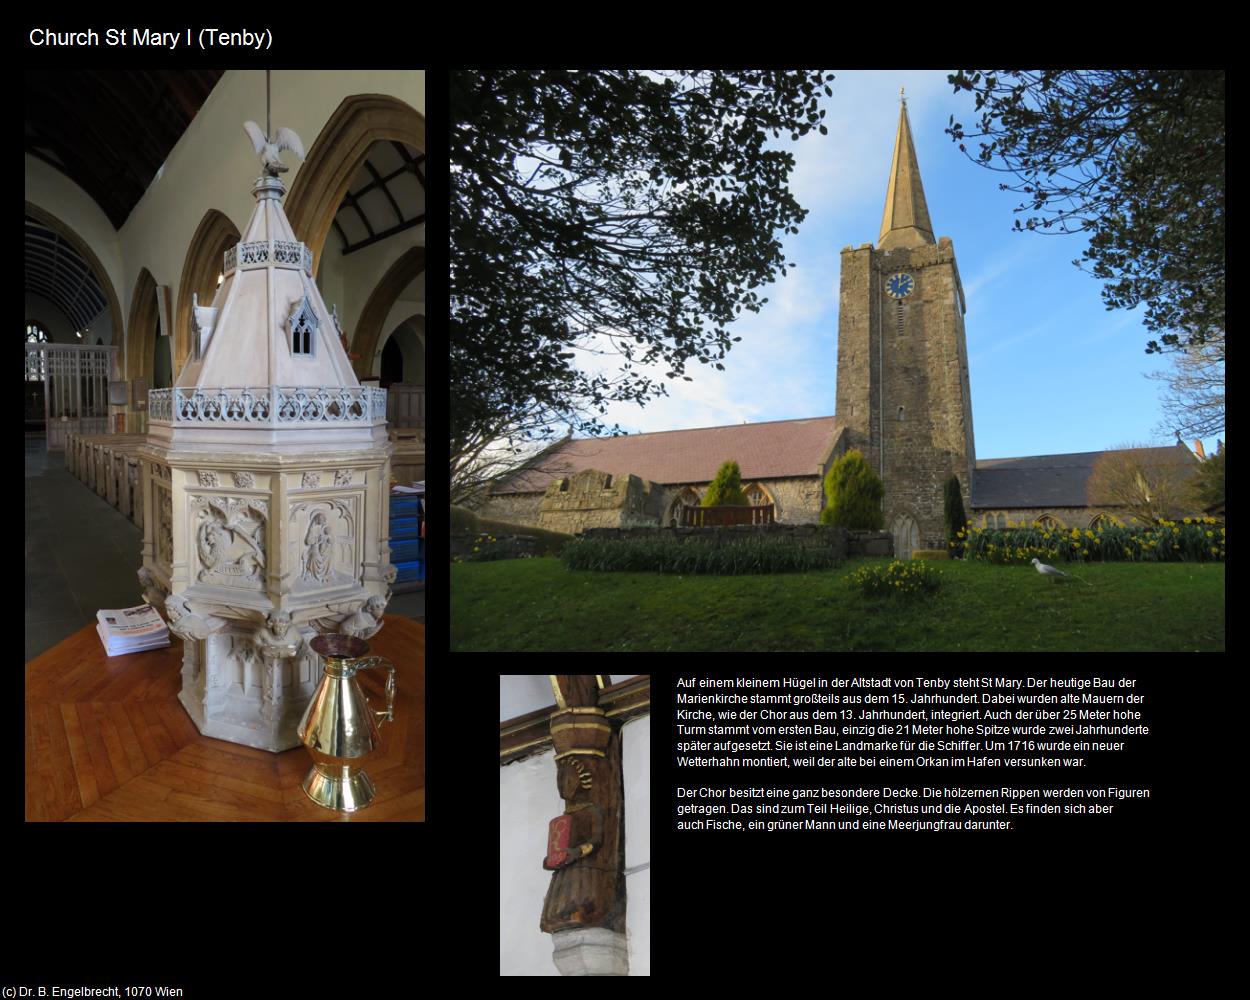 Church St Mary I  (Tenby, Wales) in Kulturatlas-ENGLAND und WALES